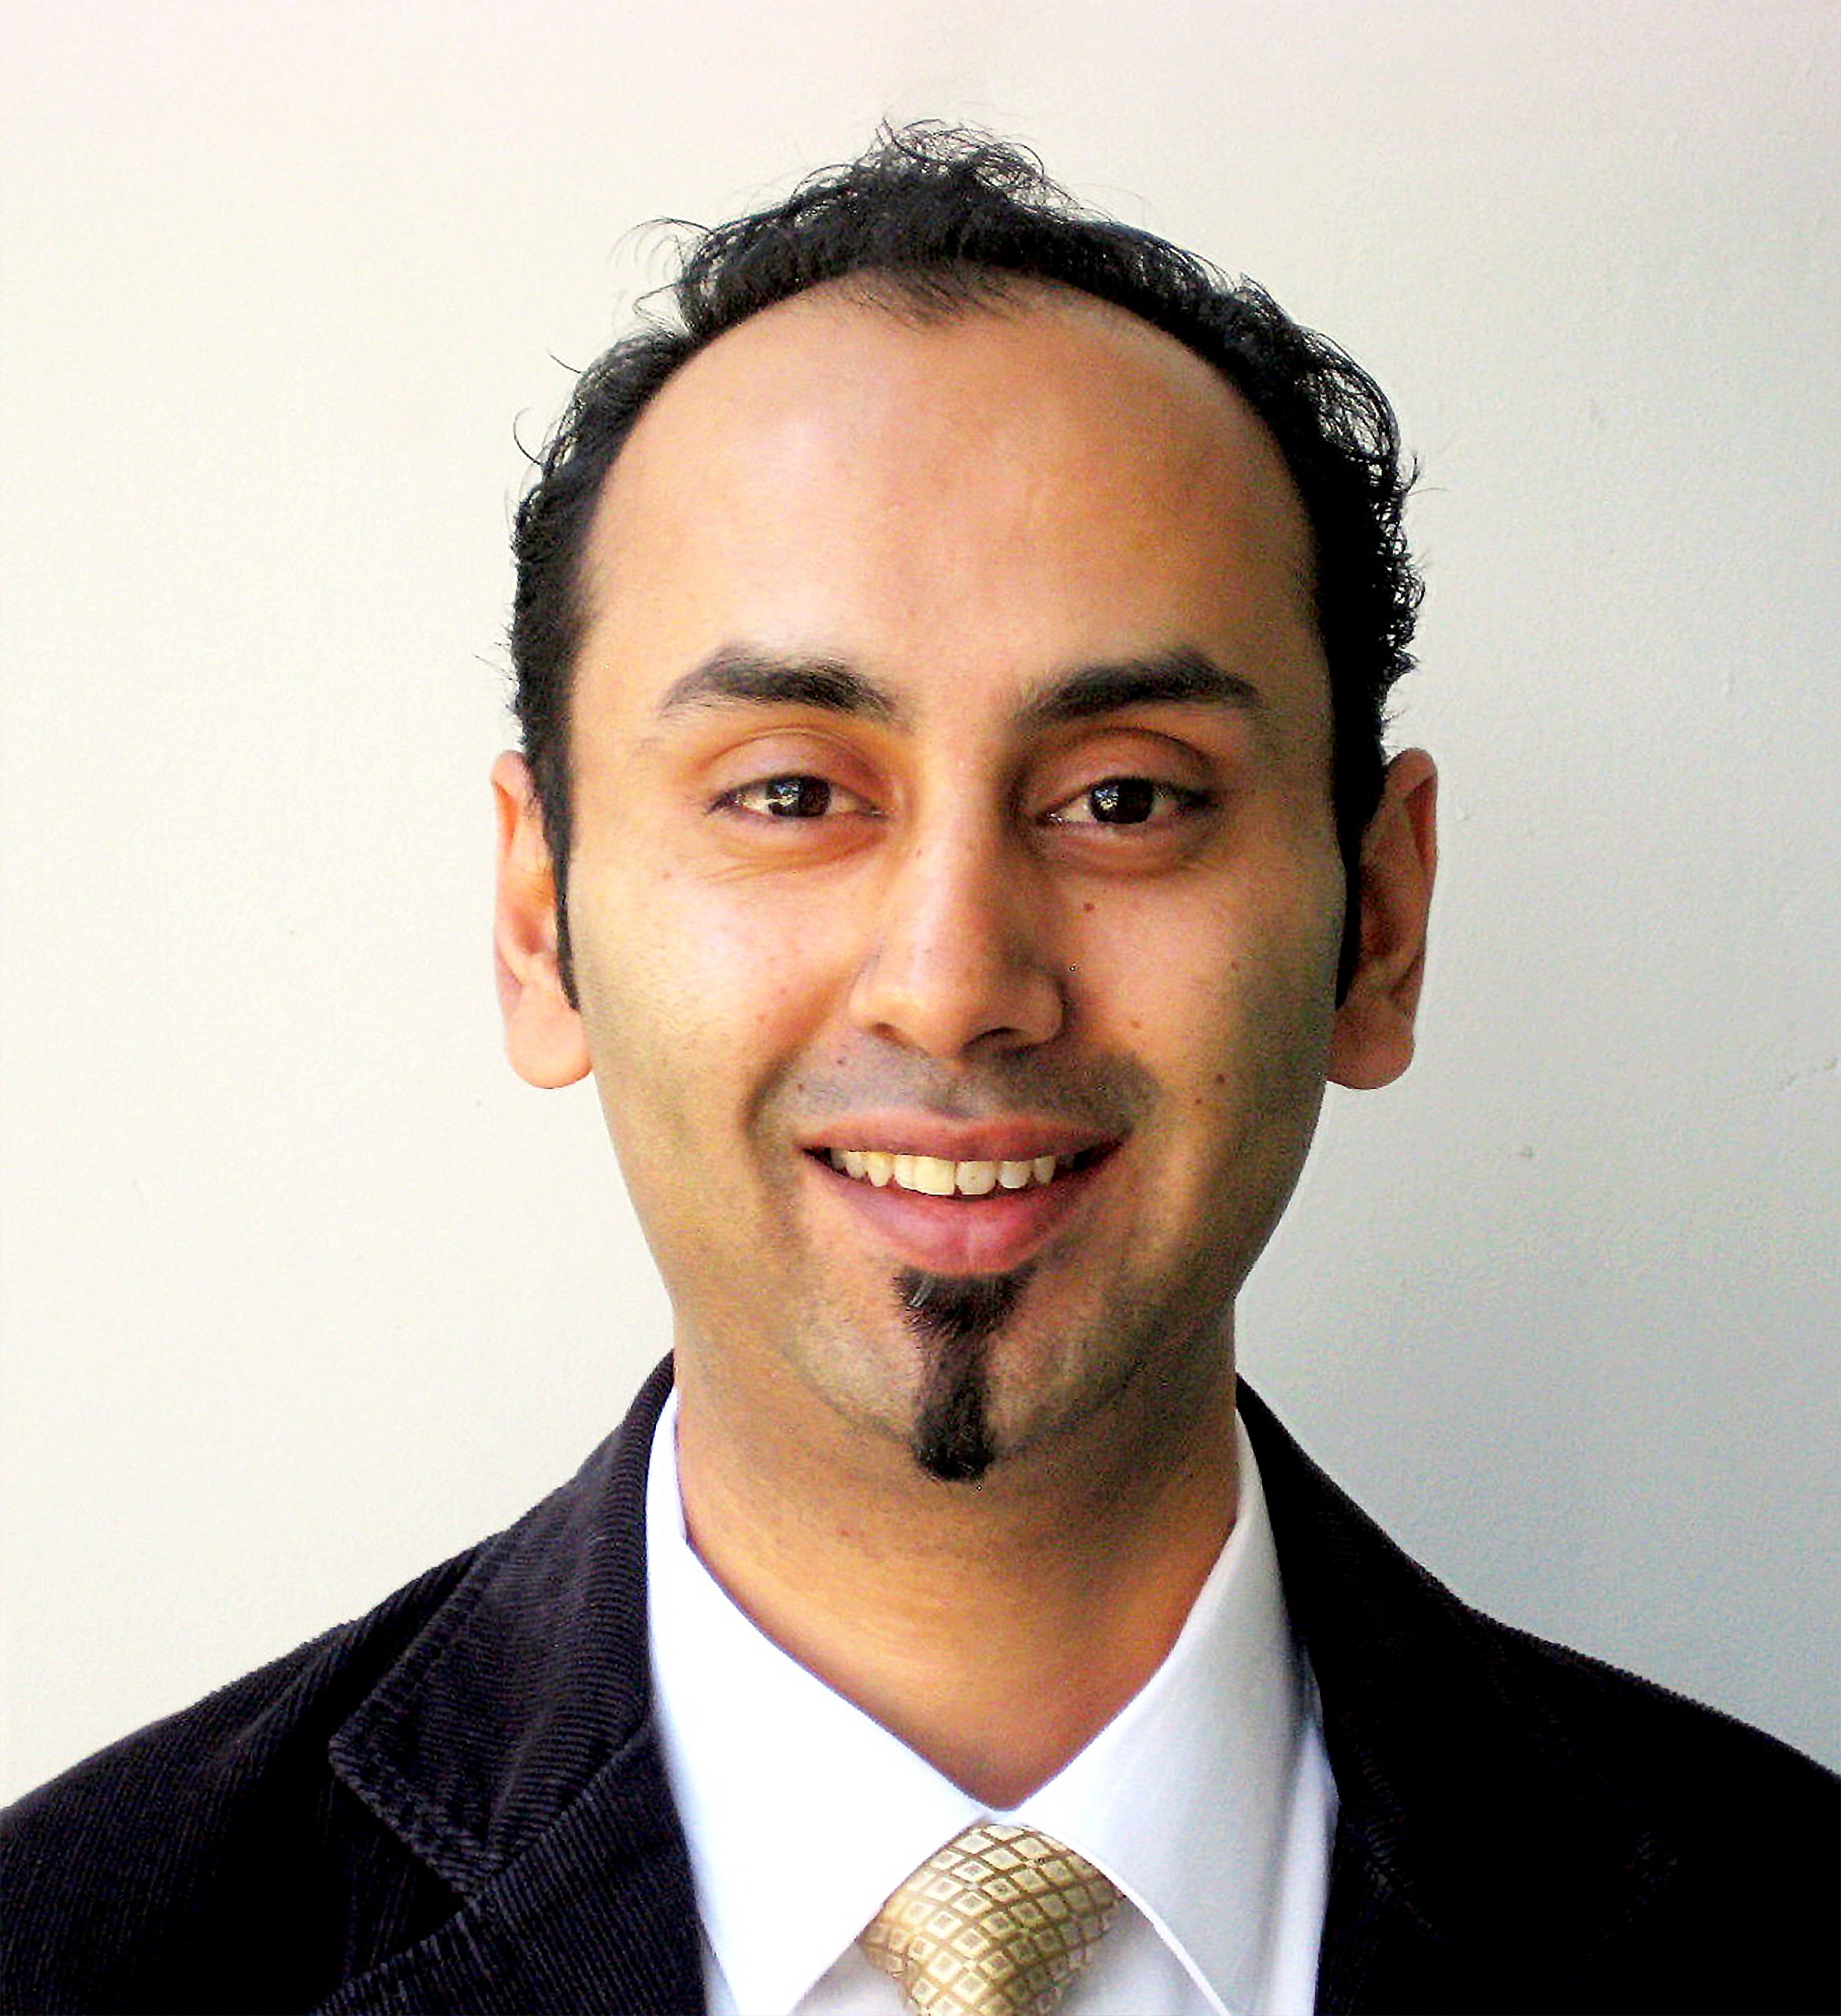 Image of Imran Mohammad, Partner and COO of Savvy CFO